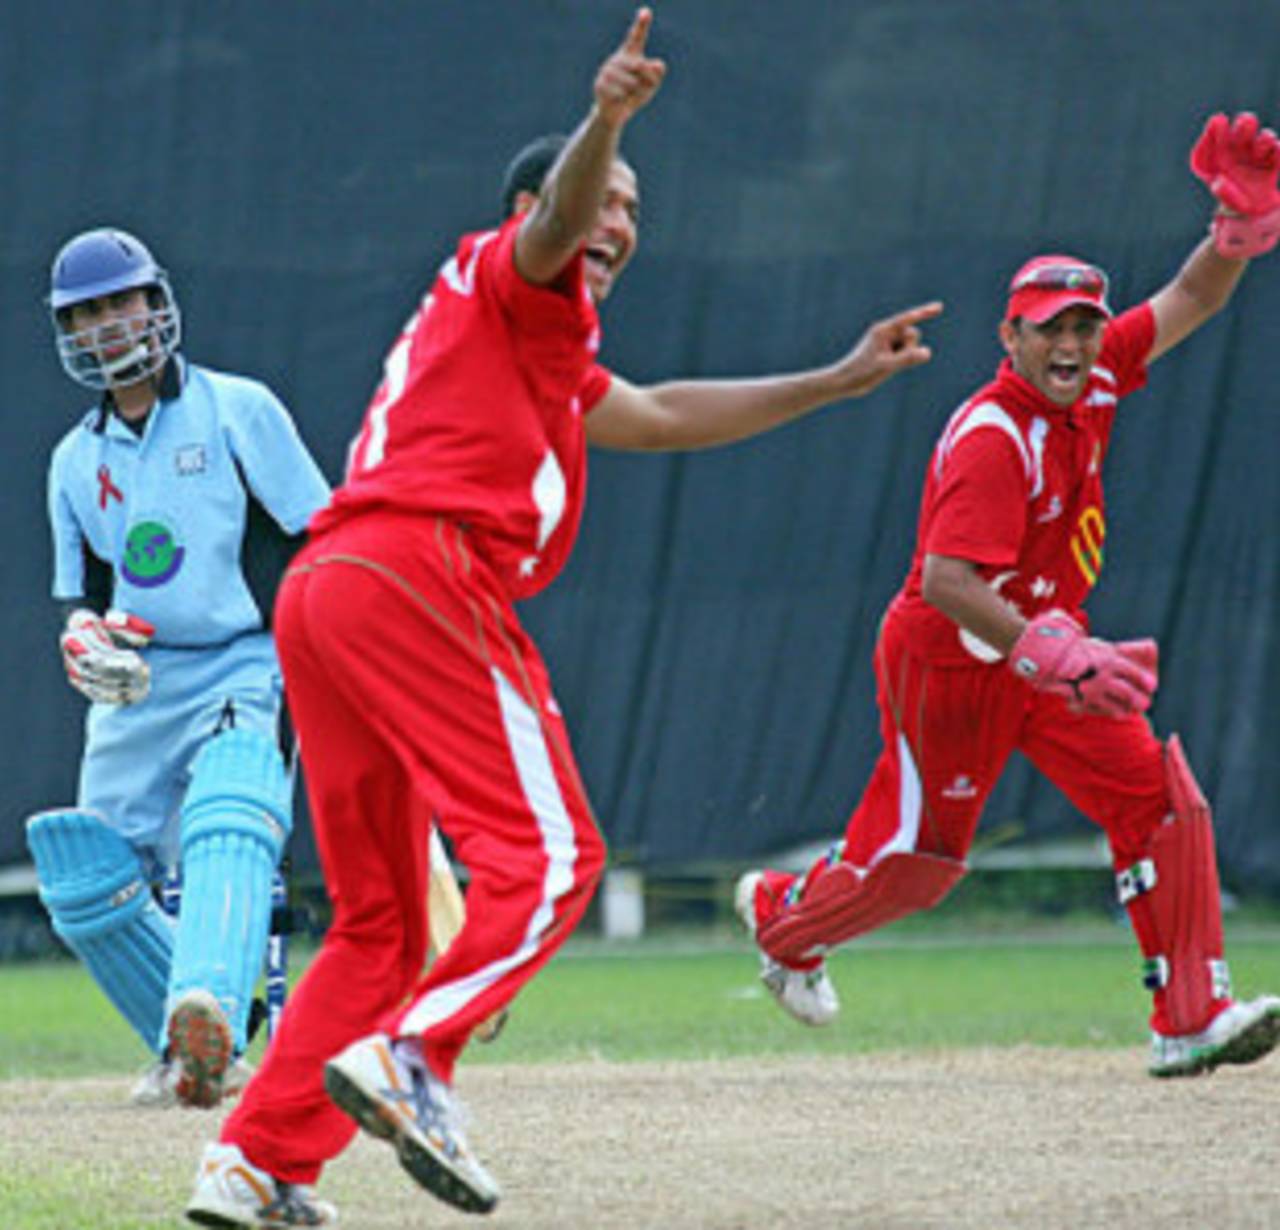 Singapore's Narender Reddy appeals for the wicket of Denzil Sequeira, Singapore v Botswana, ICC World Cricket League Division 6, Singapore, August 31, 2009 